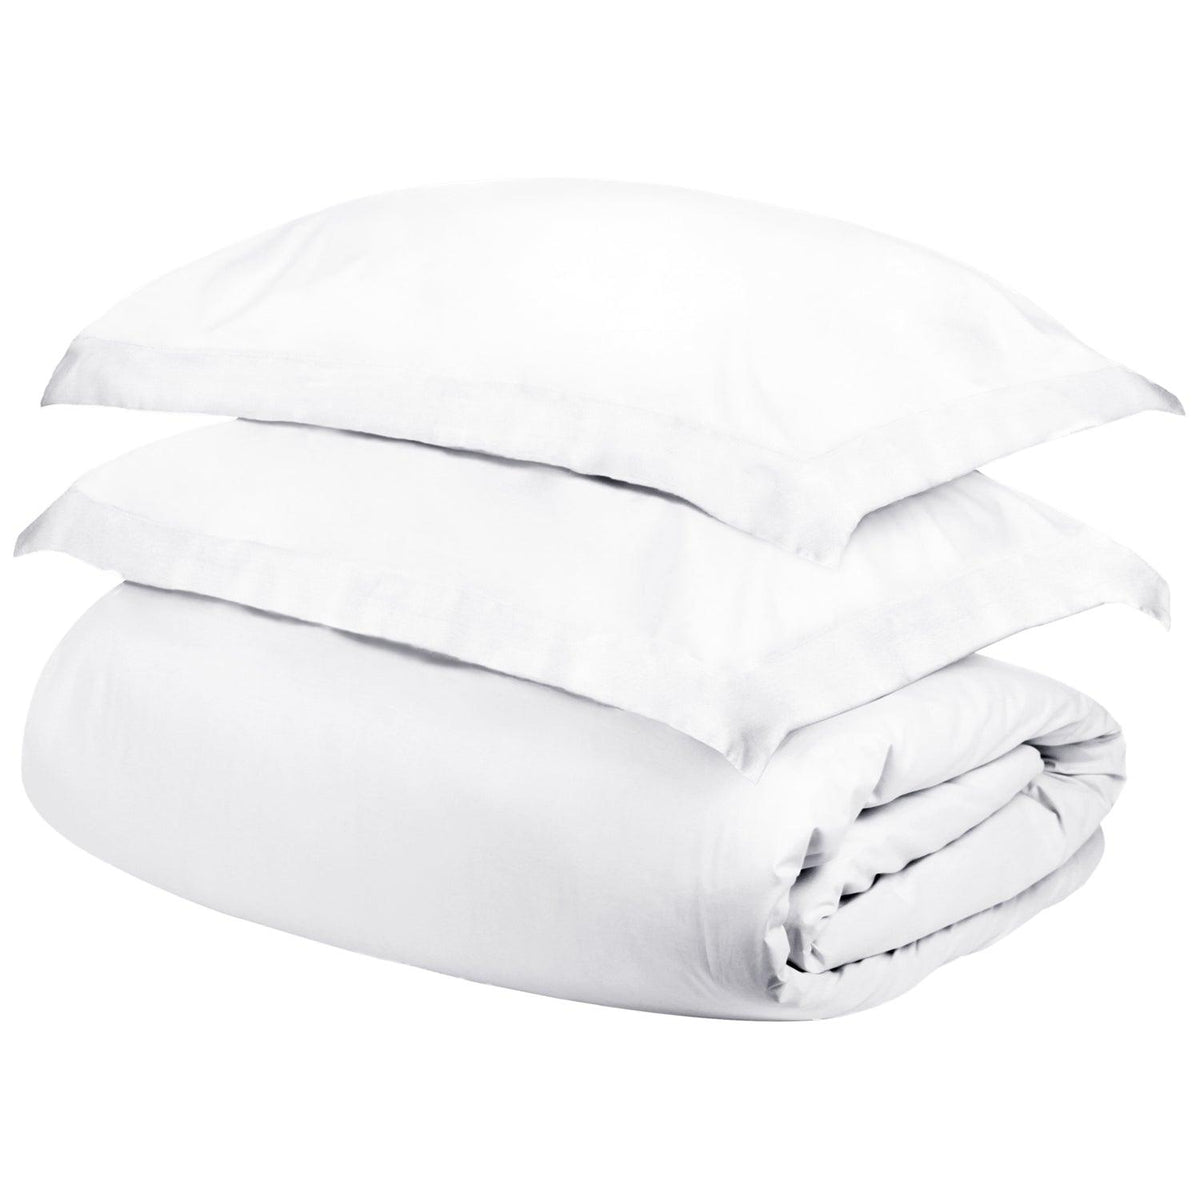  Superior Egyptian Cotton 400 Thread Count Solid Duvet Cover Set - White